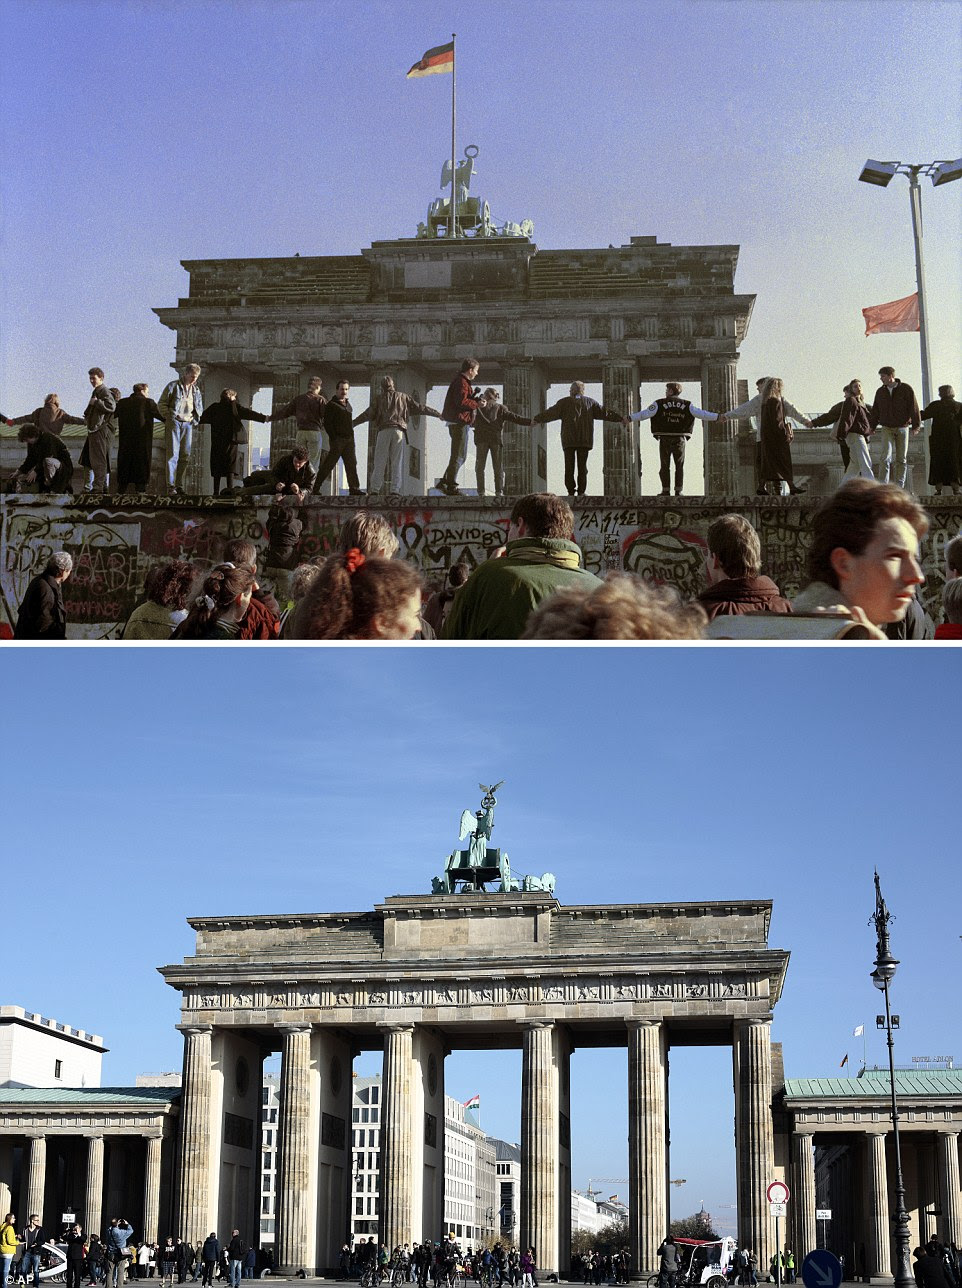 Changes: People started to pull down the Berlin Wall all after the East German Government allowed people to visit the West of the city on November 9, 1989. The top picture shows people dancing on the wall at the Brandenburg Gate in Berlin the day after the ruling, while the bottom image shows how the landmark looks 25 years on